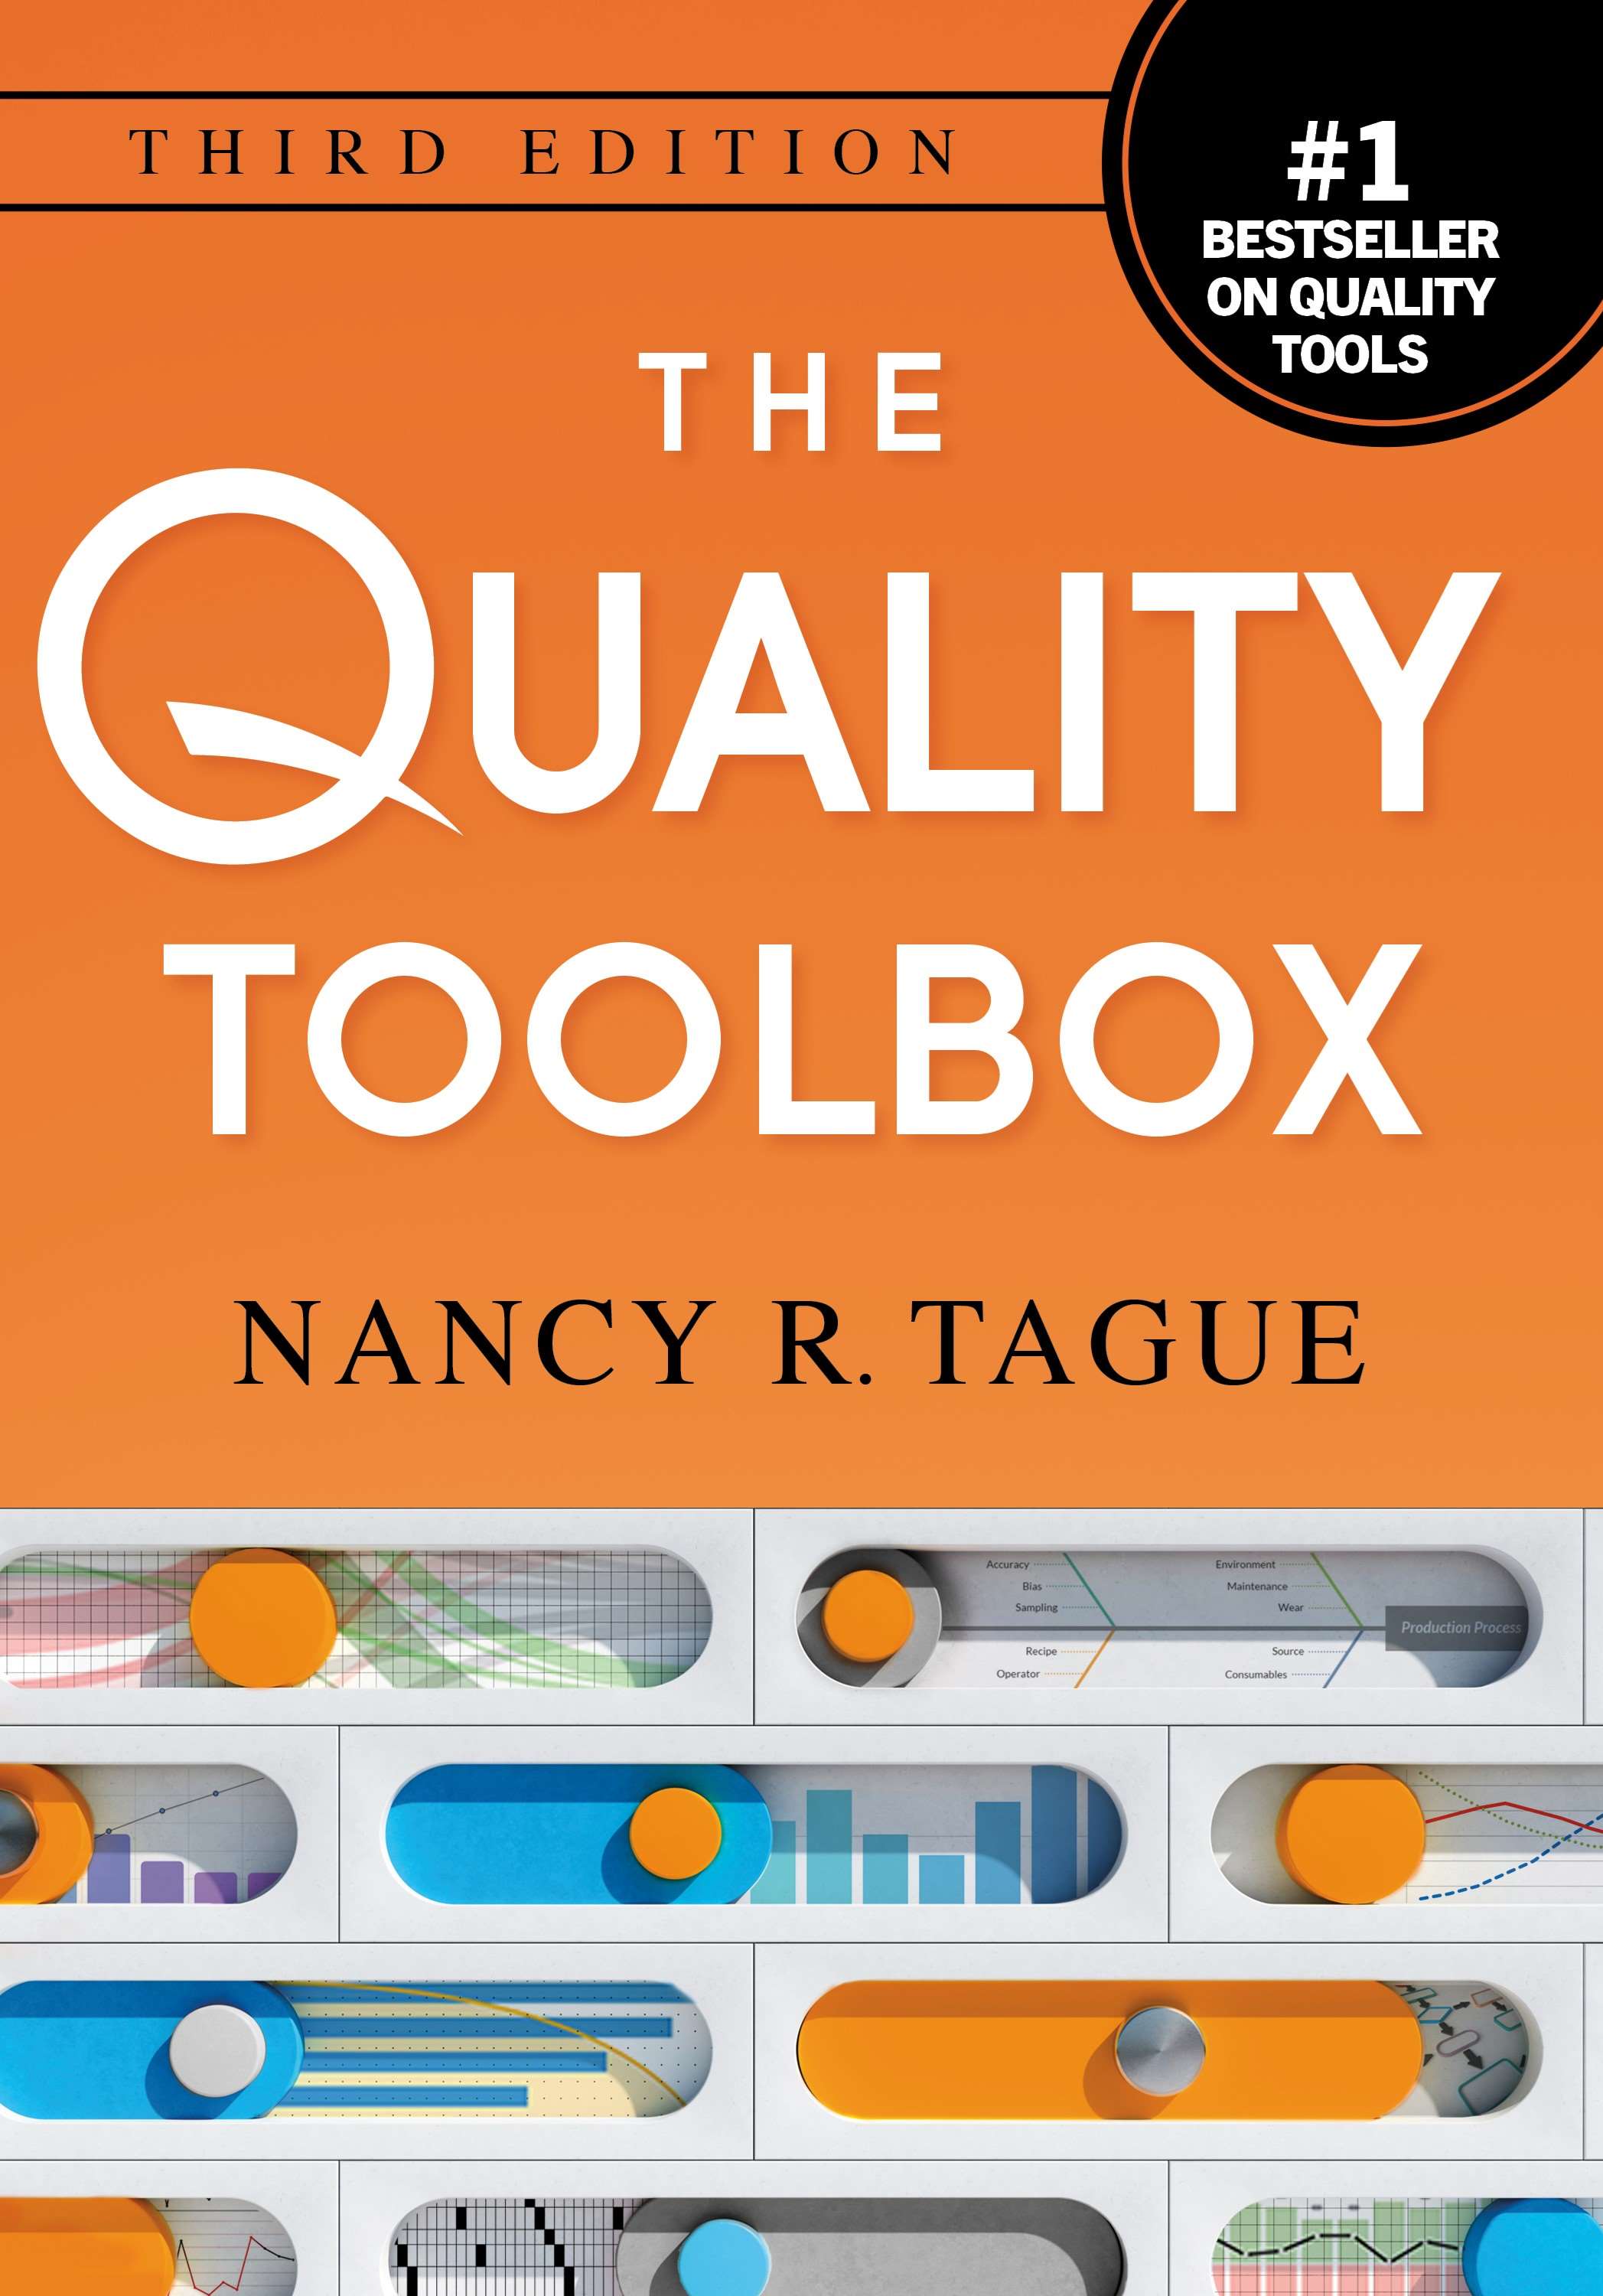 The Quality Toolbox, Third Edition